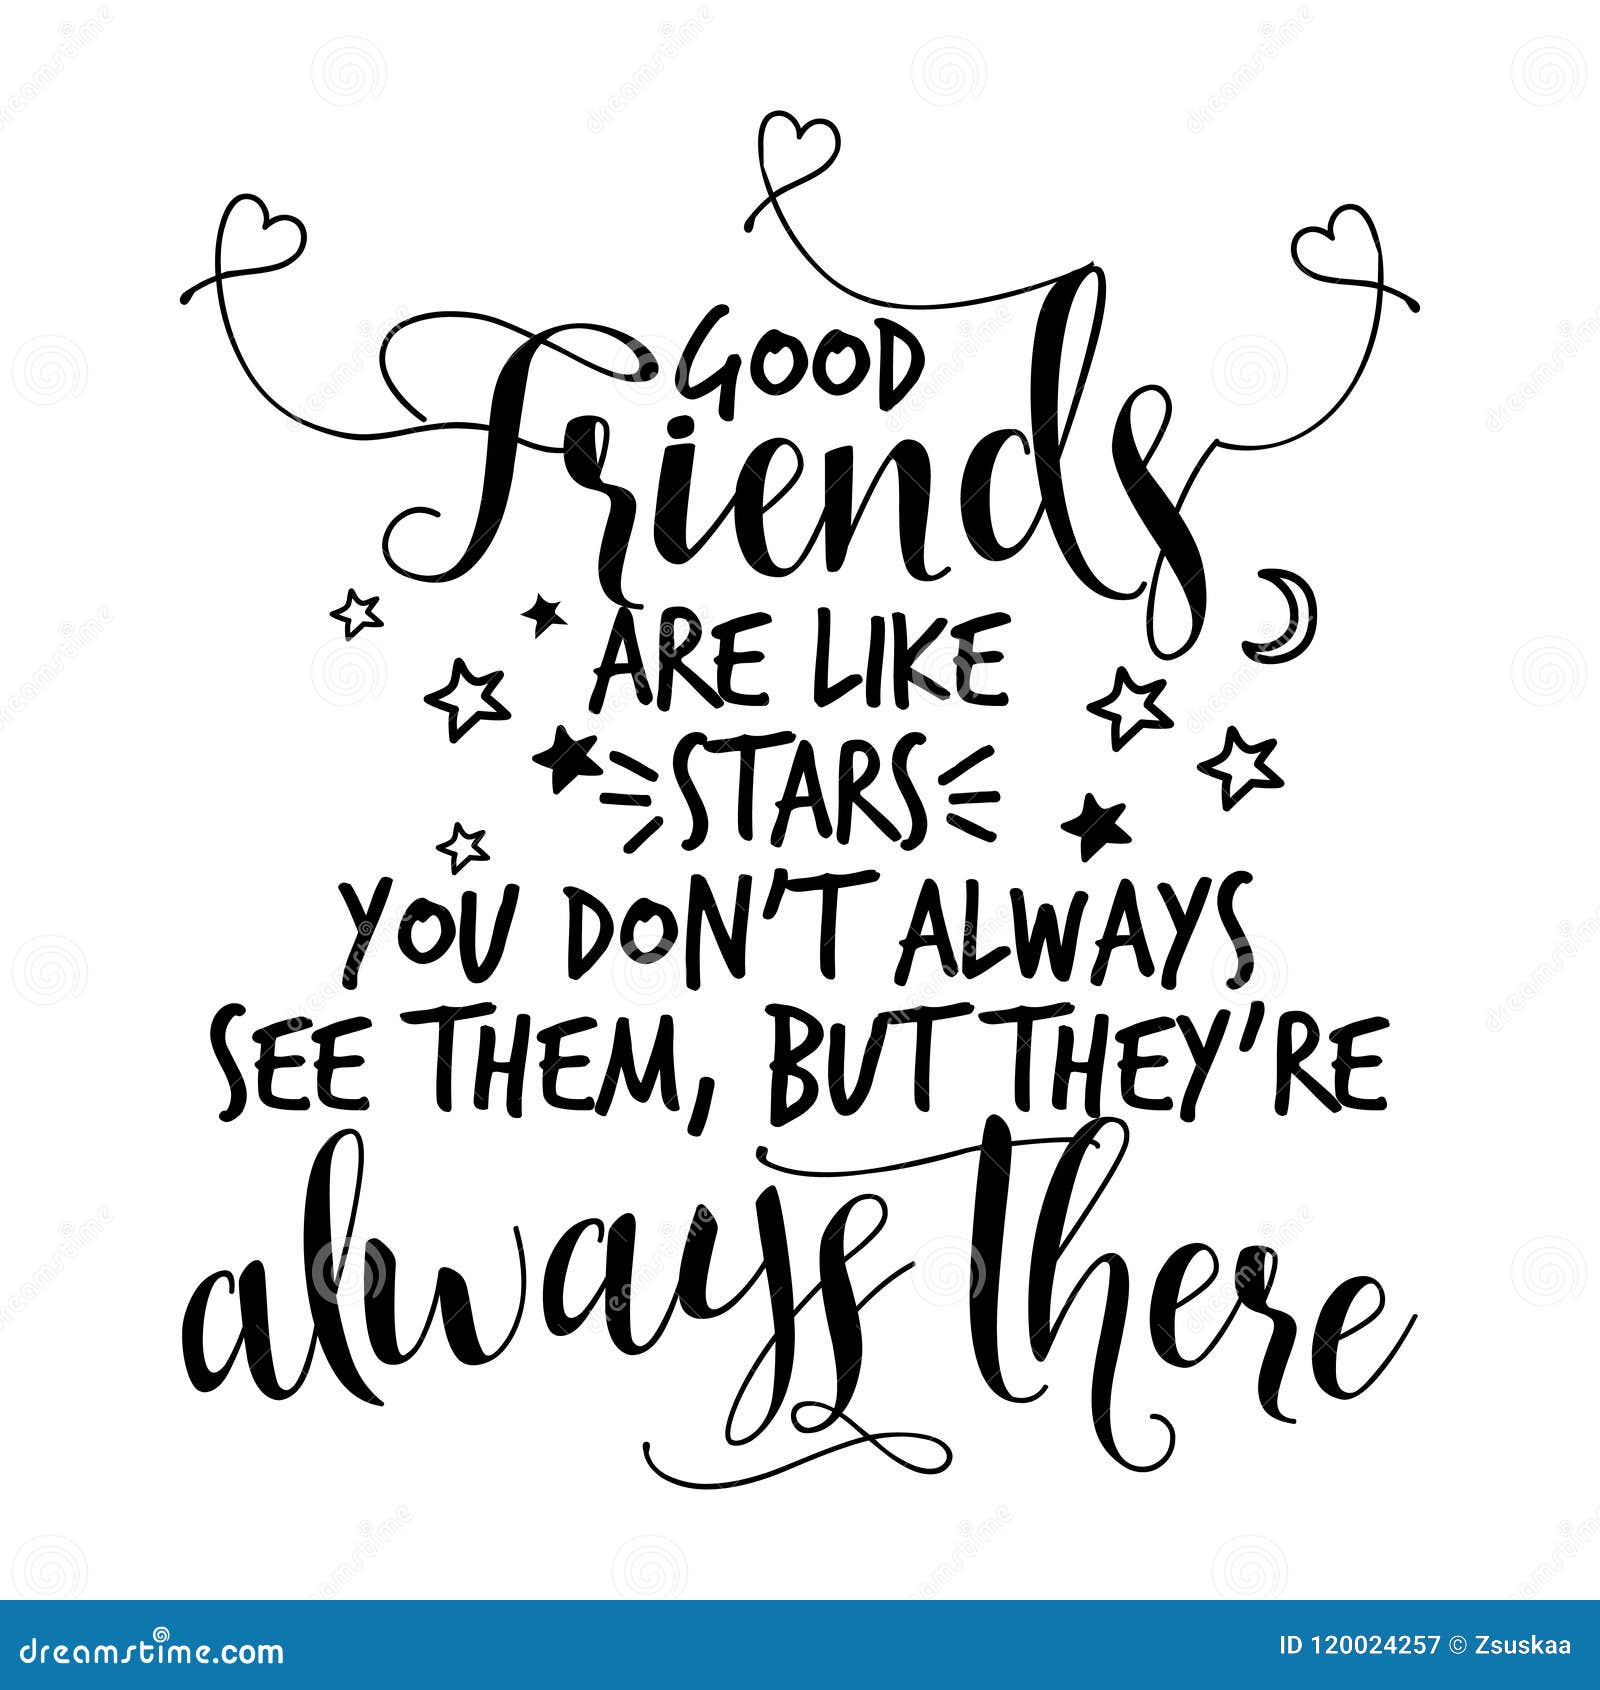 good friends are like stars, you don`t always see them, but they`re always there